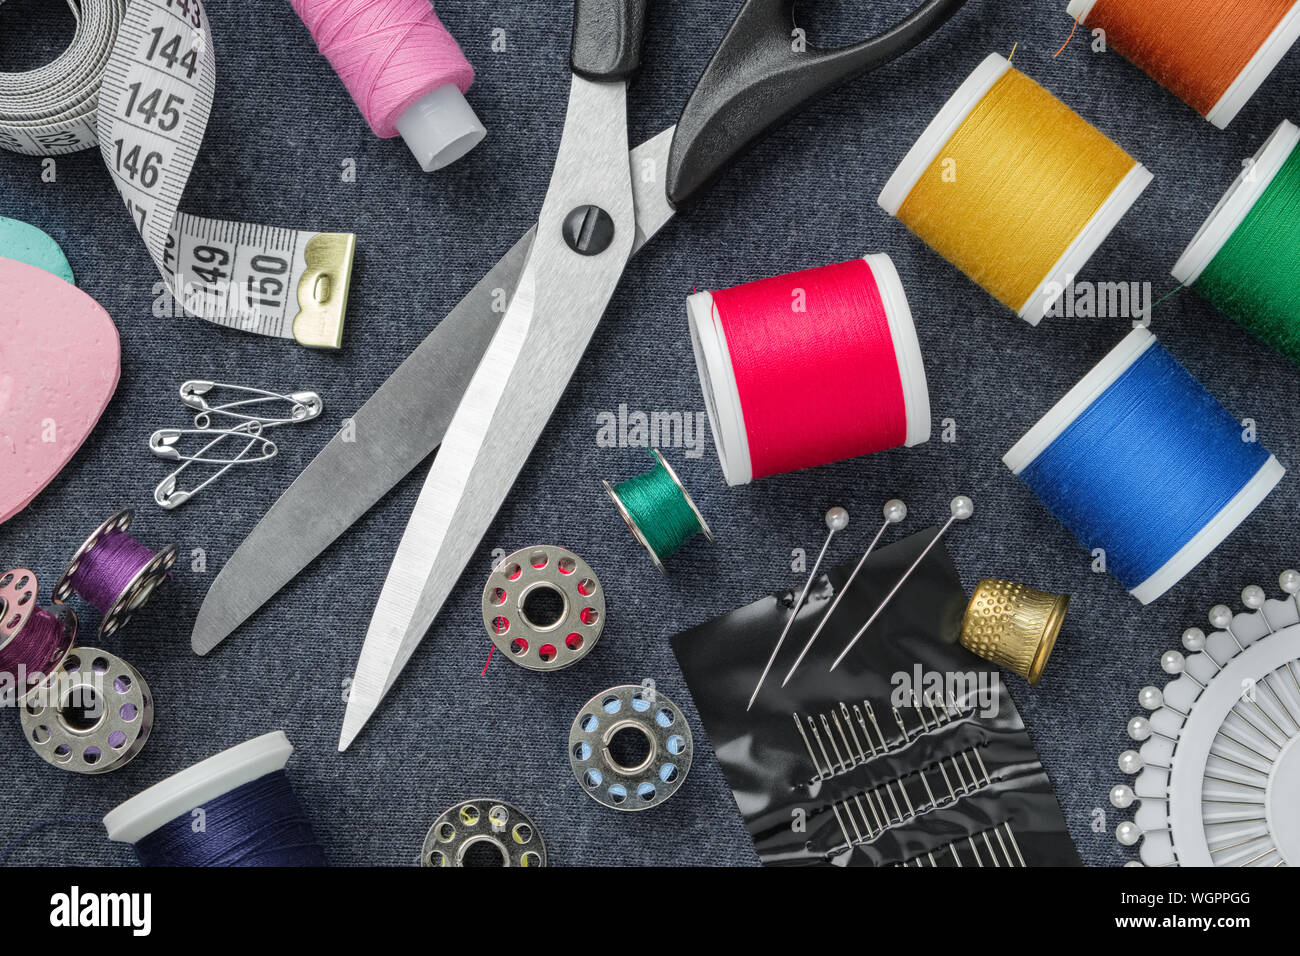 Sewing items: tailoring scissors, measuring tape, thimble, spools